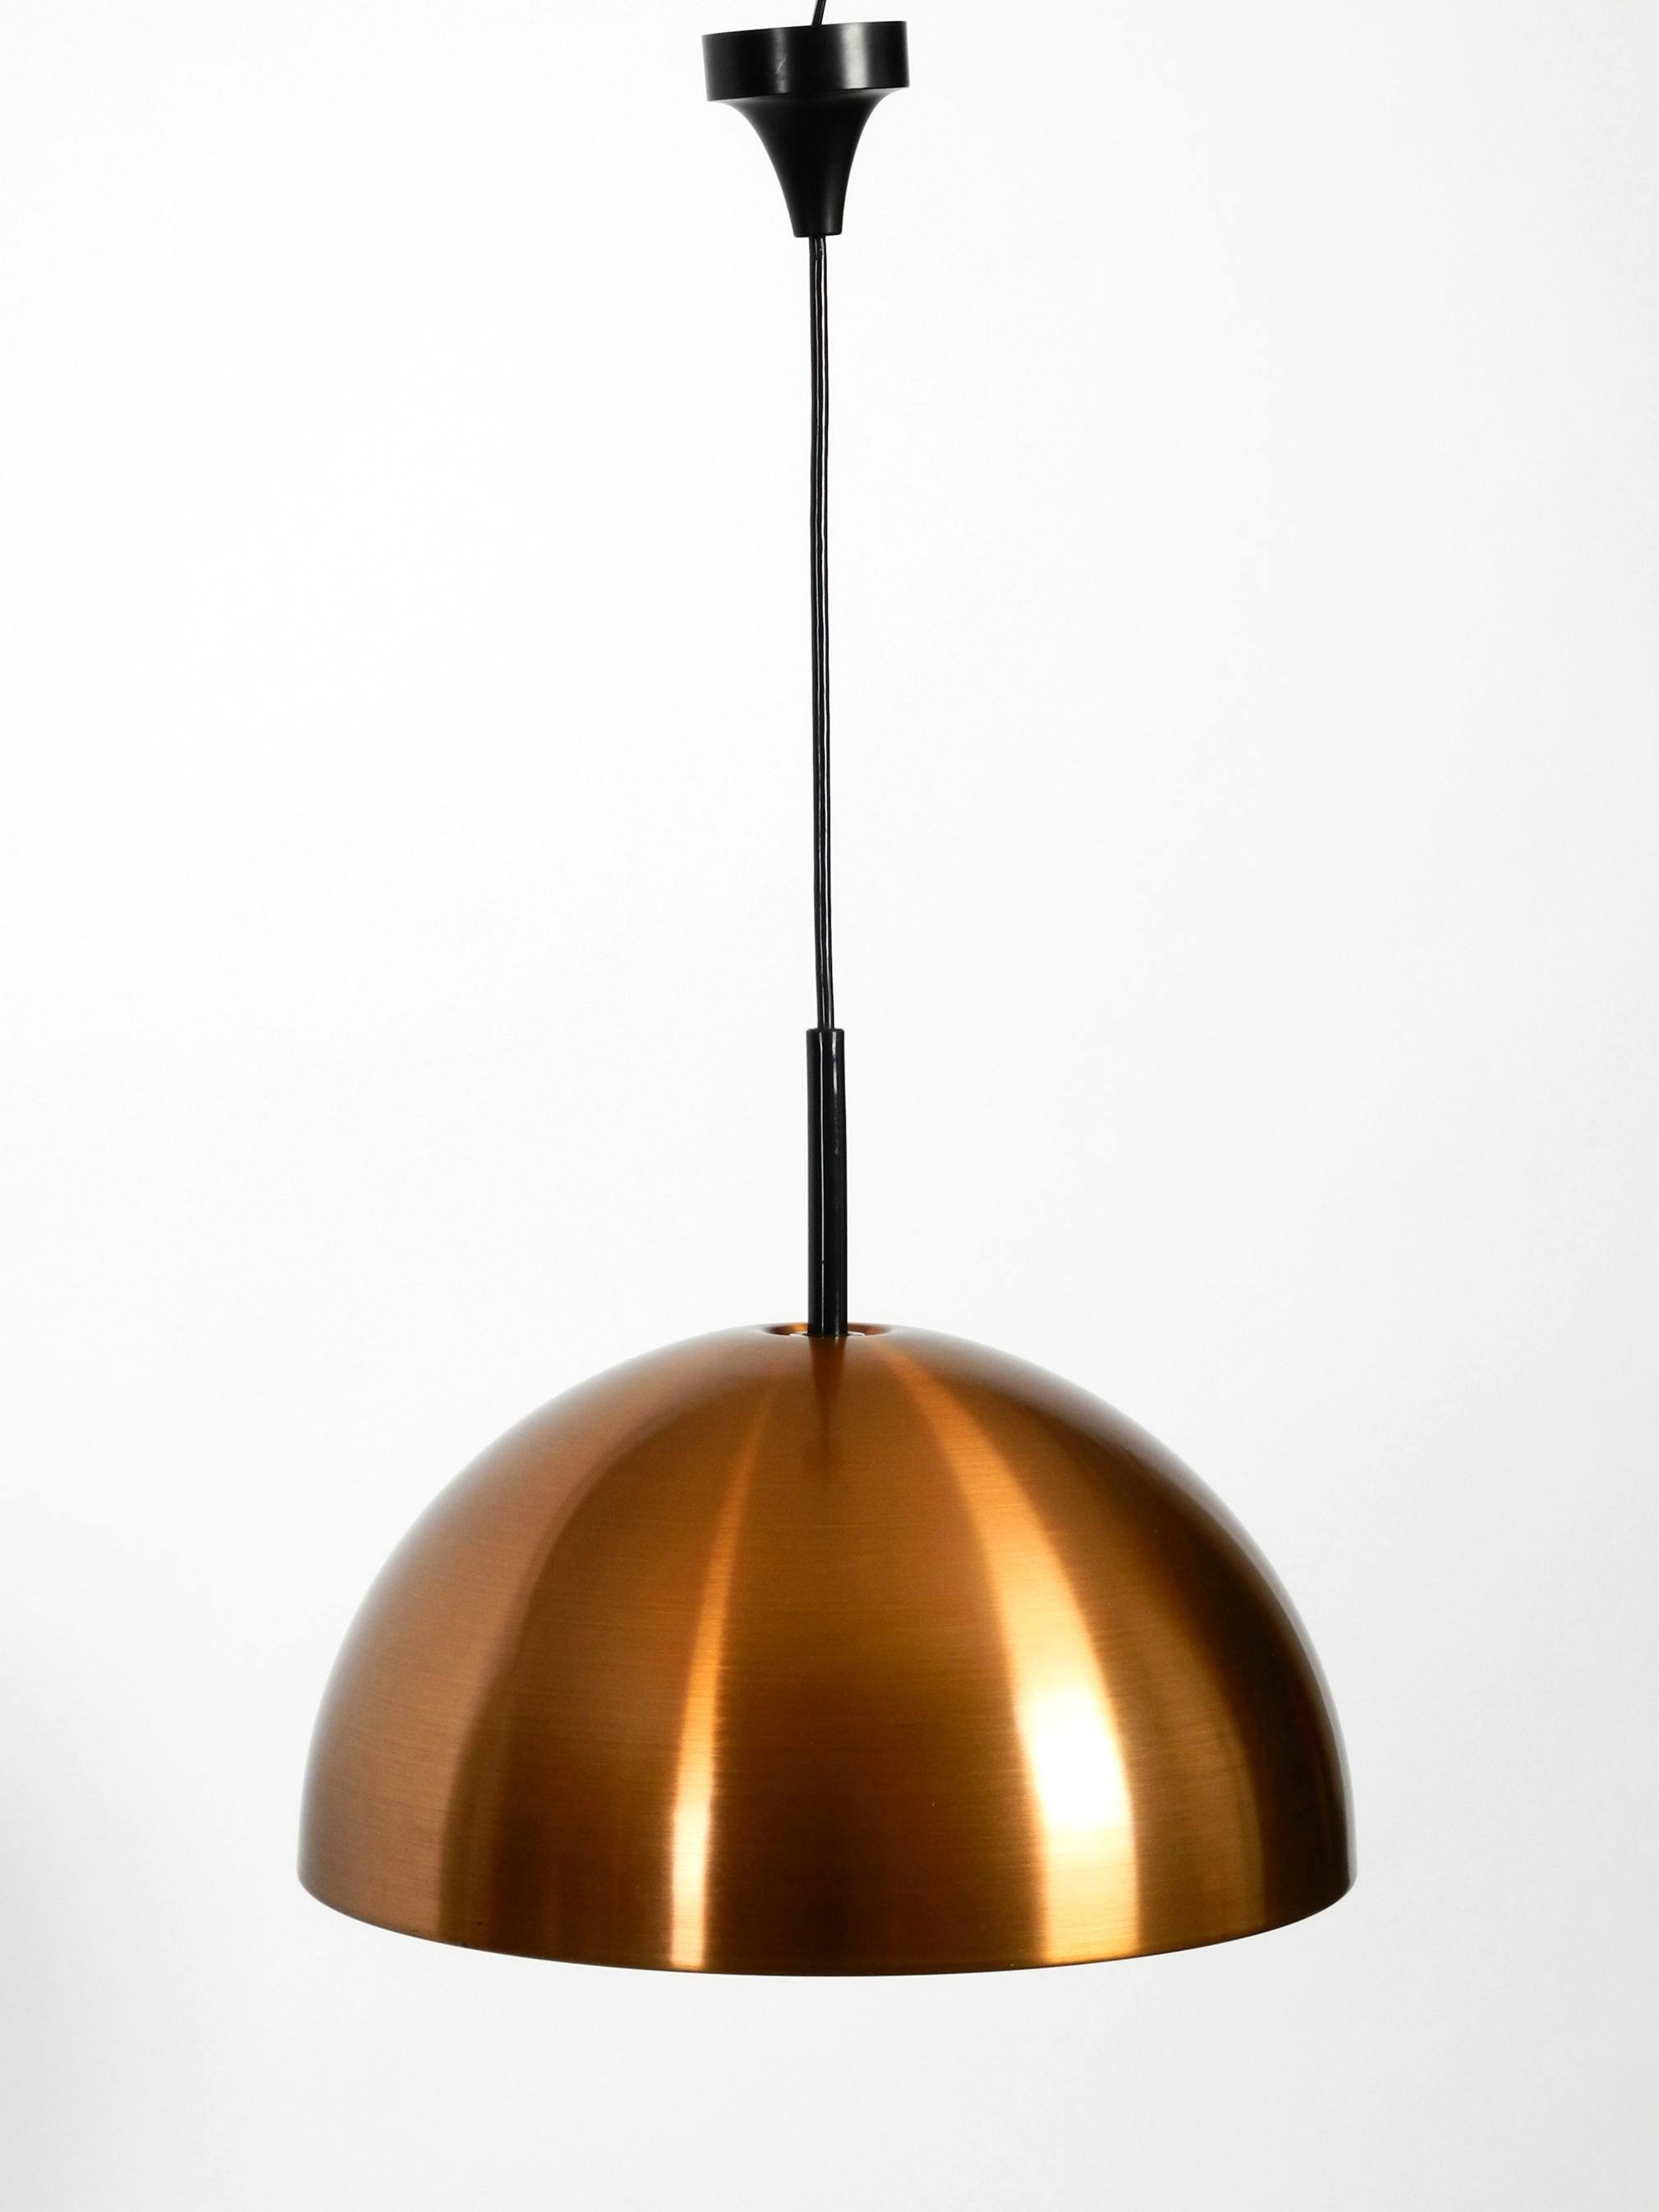 Original 1970s Space Age Staff Pendant Lamp with Copper Shade in Mint Condition For Sale 1